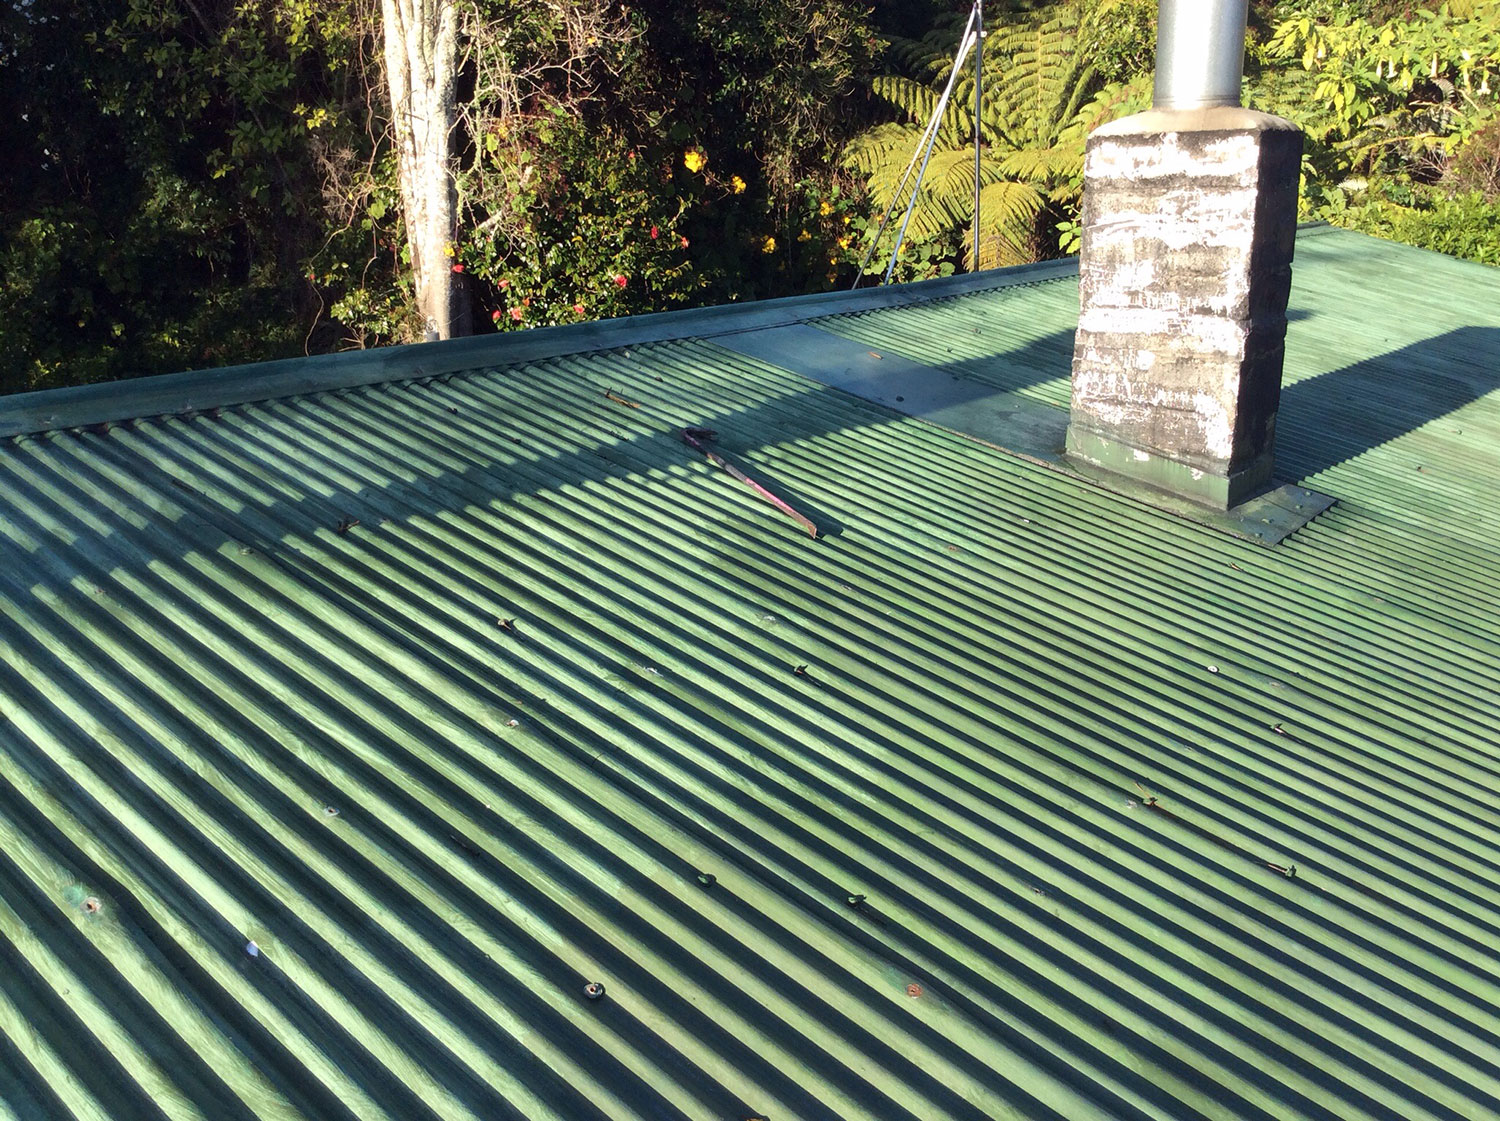 auckland roofing solutions services auckland and new zealand wide new roofs repair cladding and more Project gallery 33